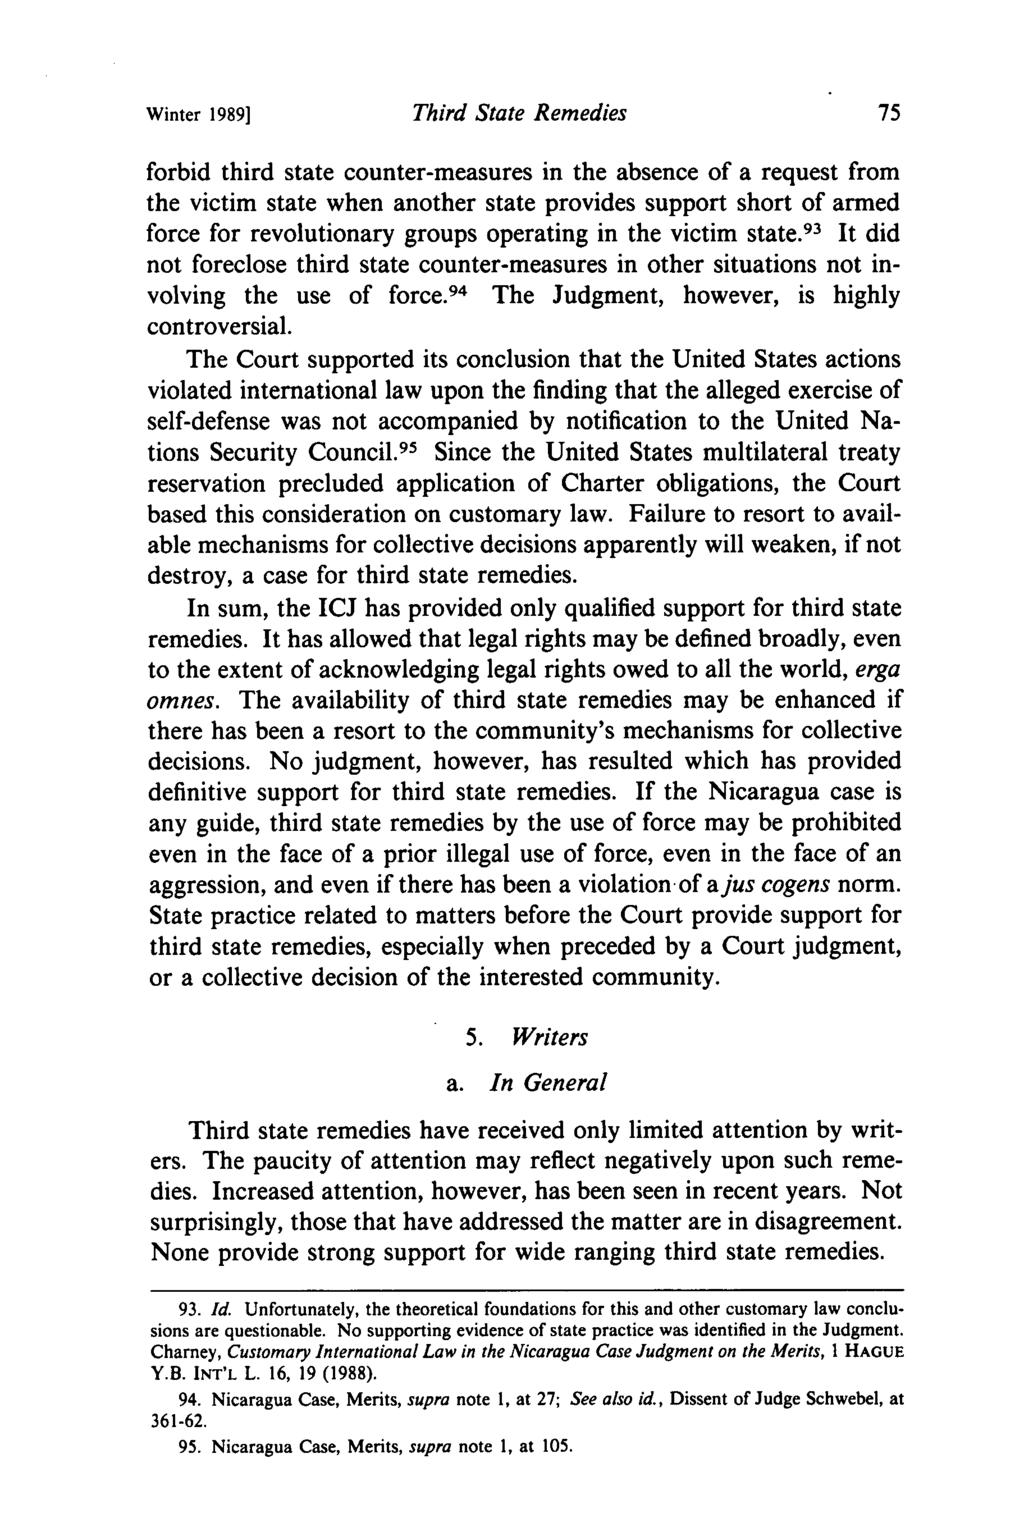 Winter 1989] Third State Remedies forbid third state counter-measures in the absence of a request from the victim state when another state provides support short of armed force for revolutionary